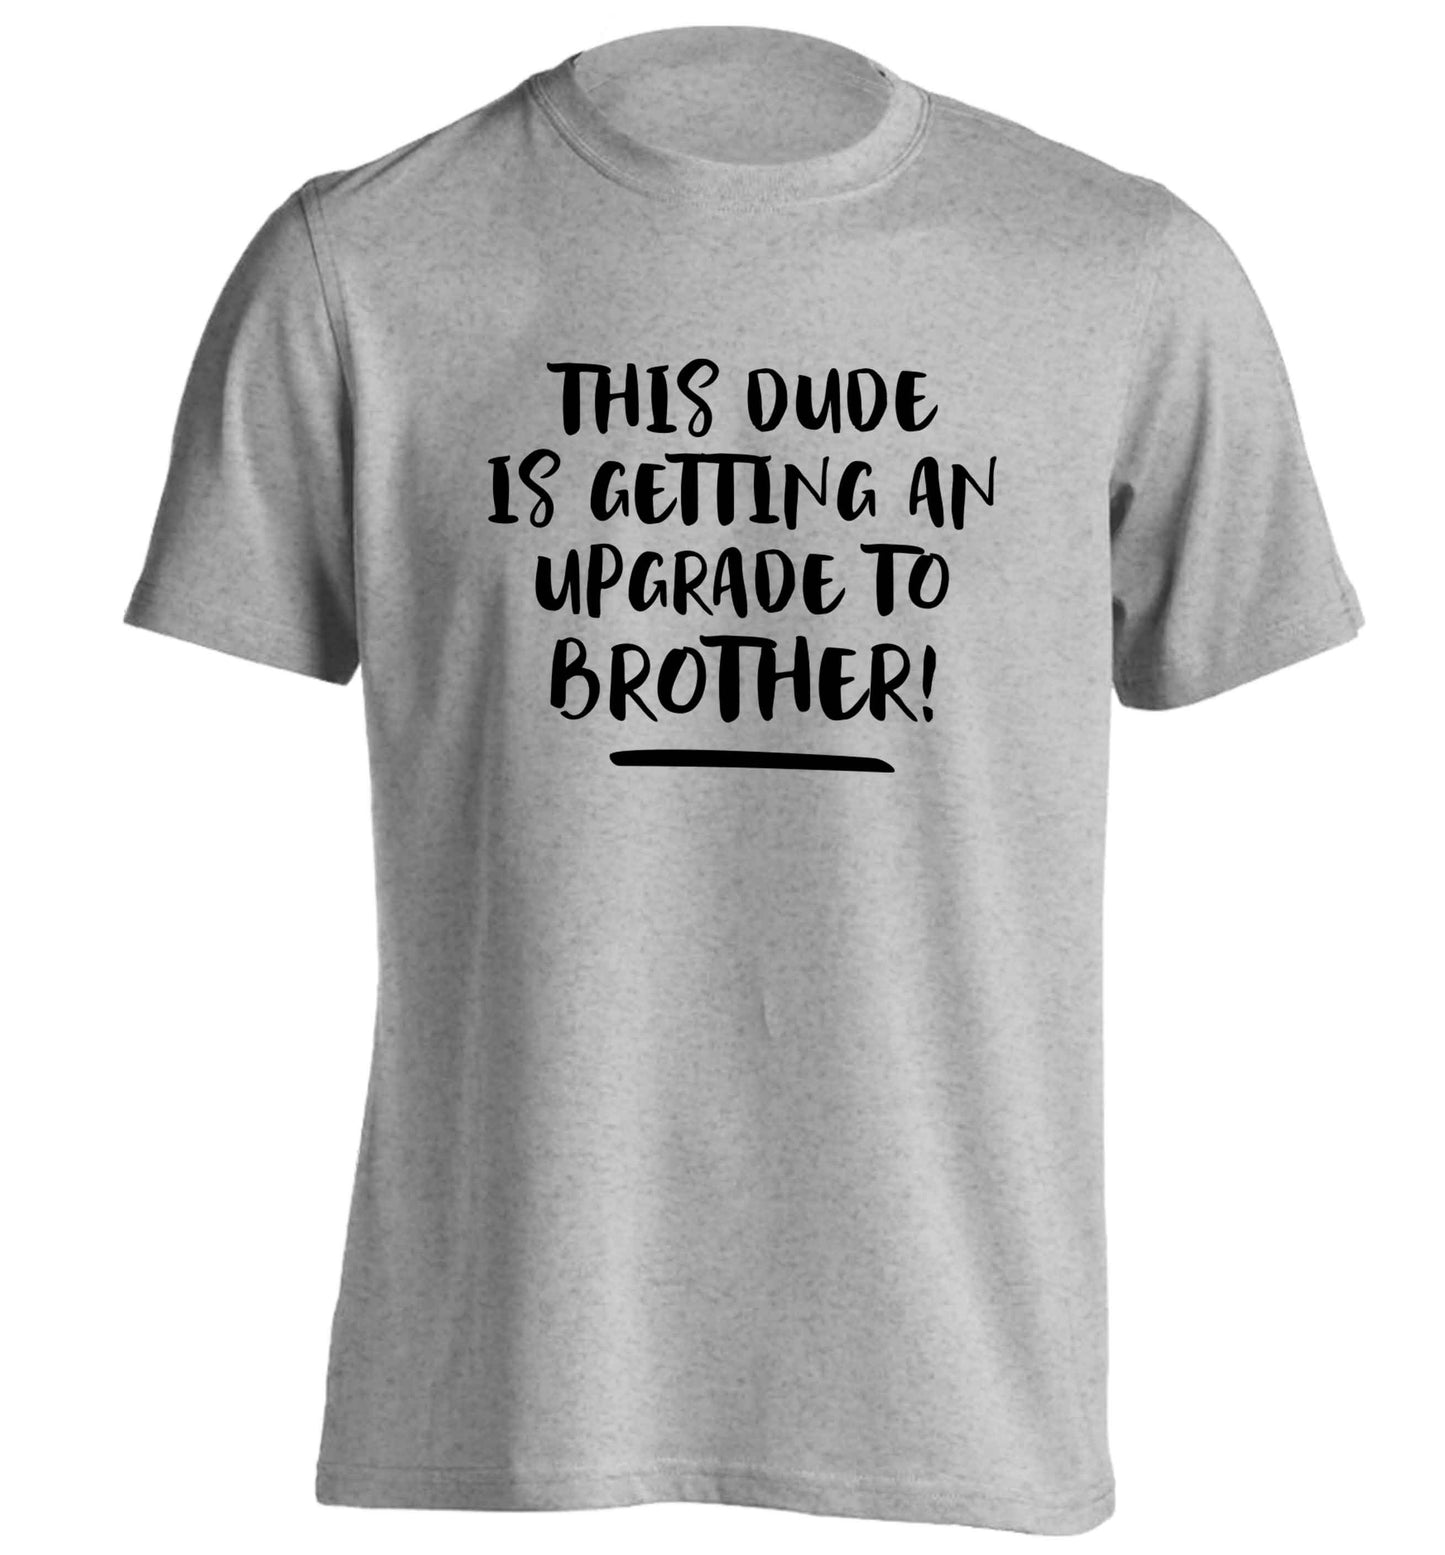 This dude is getting an upgrade to brother! adults unisex grey Tshirt 2XL